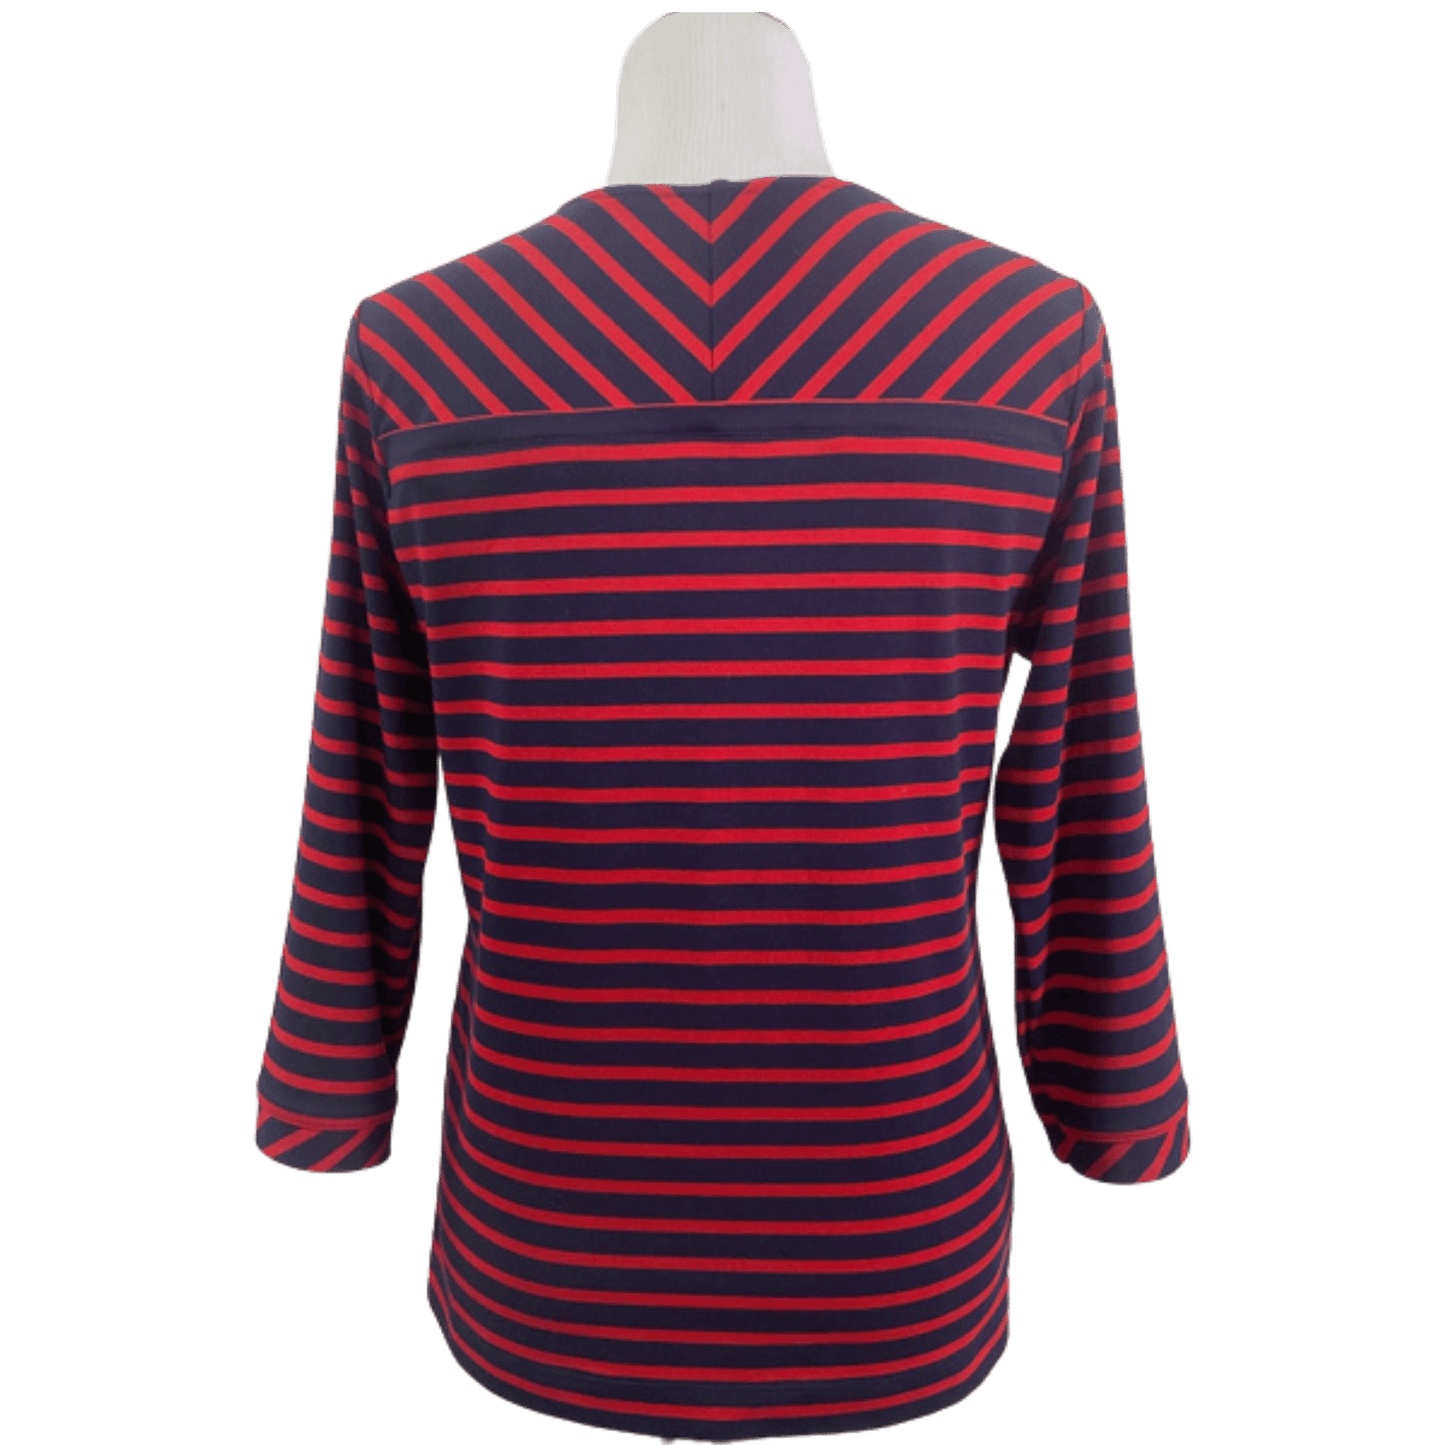 The back of a navy and red striped shirt on a mannequin